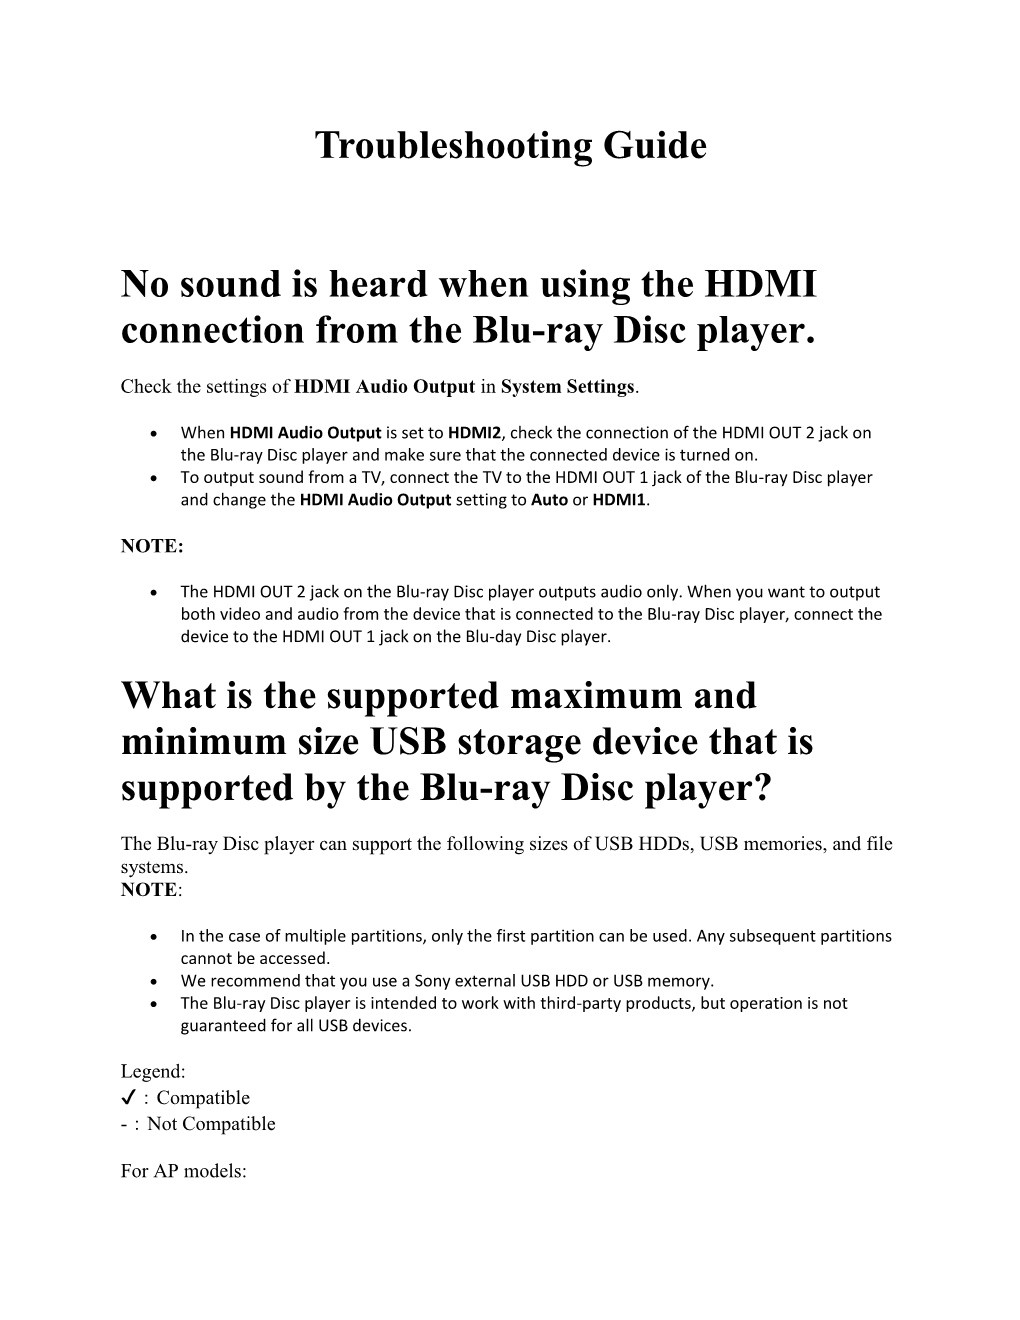 Troubleshooting Guide No Sound Is Heard When Using the HDMI